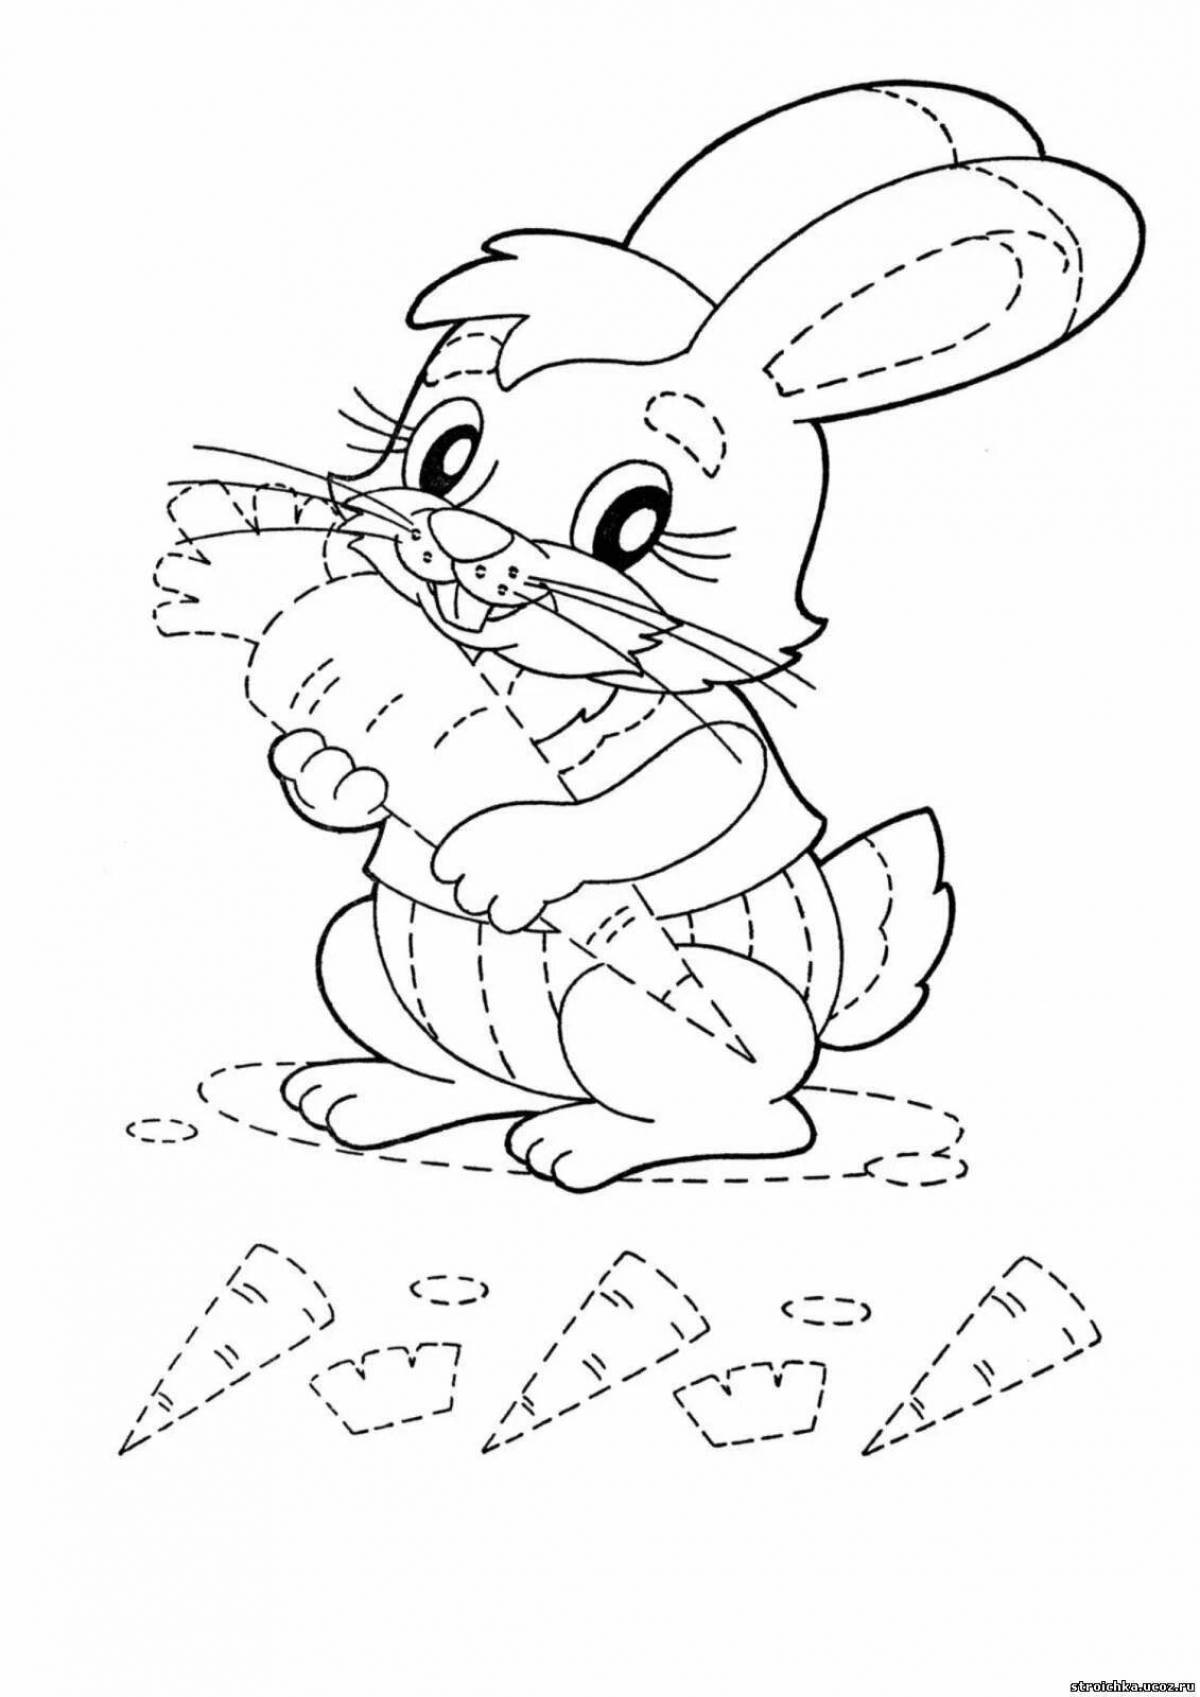 Cute coloring hare from a fairy tale